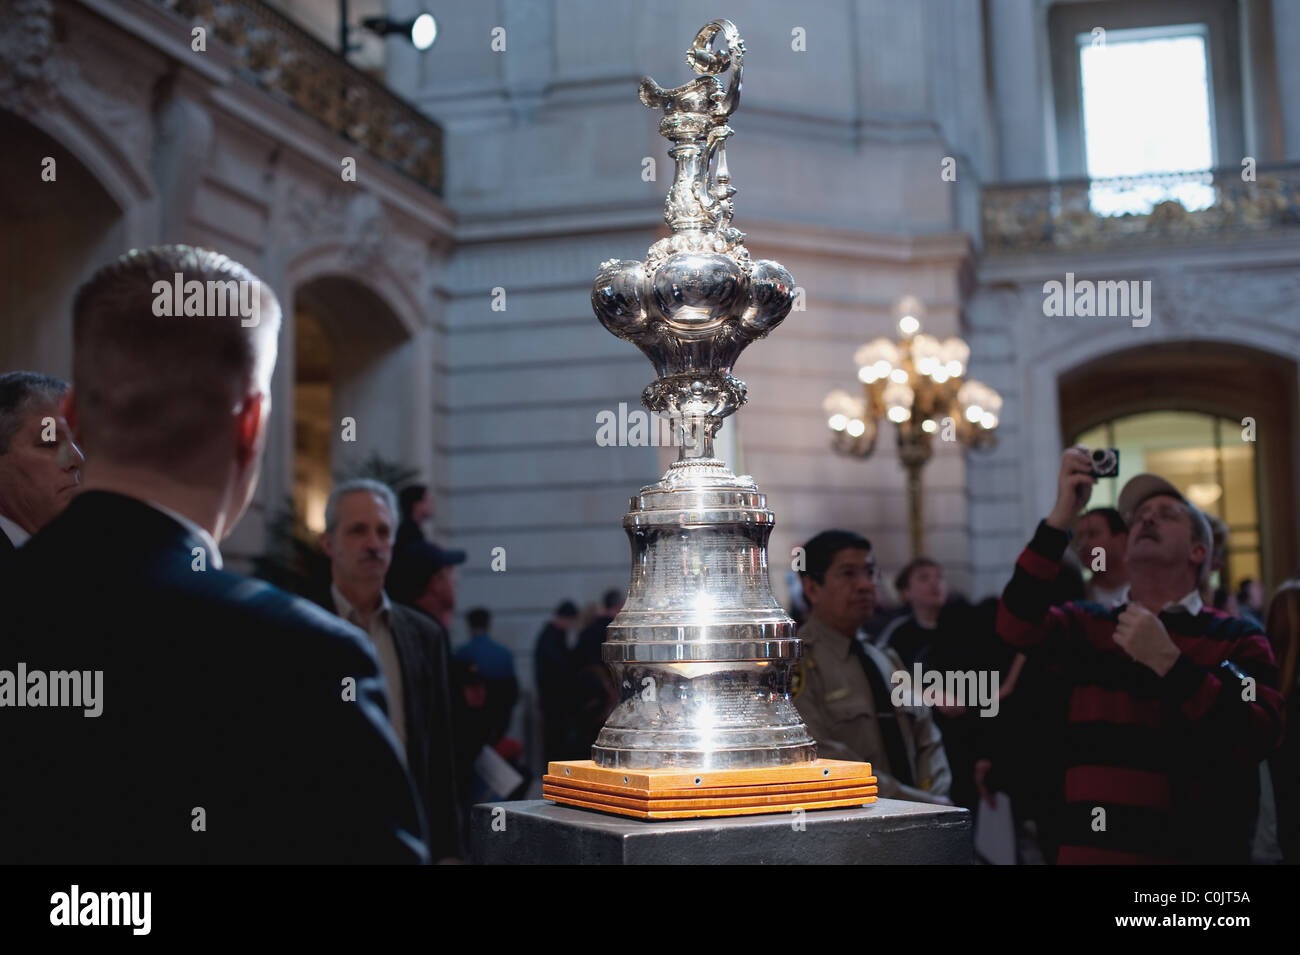 The America's Cup trophy on display at City hall in San Francisco Stock Photo